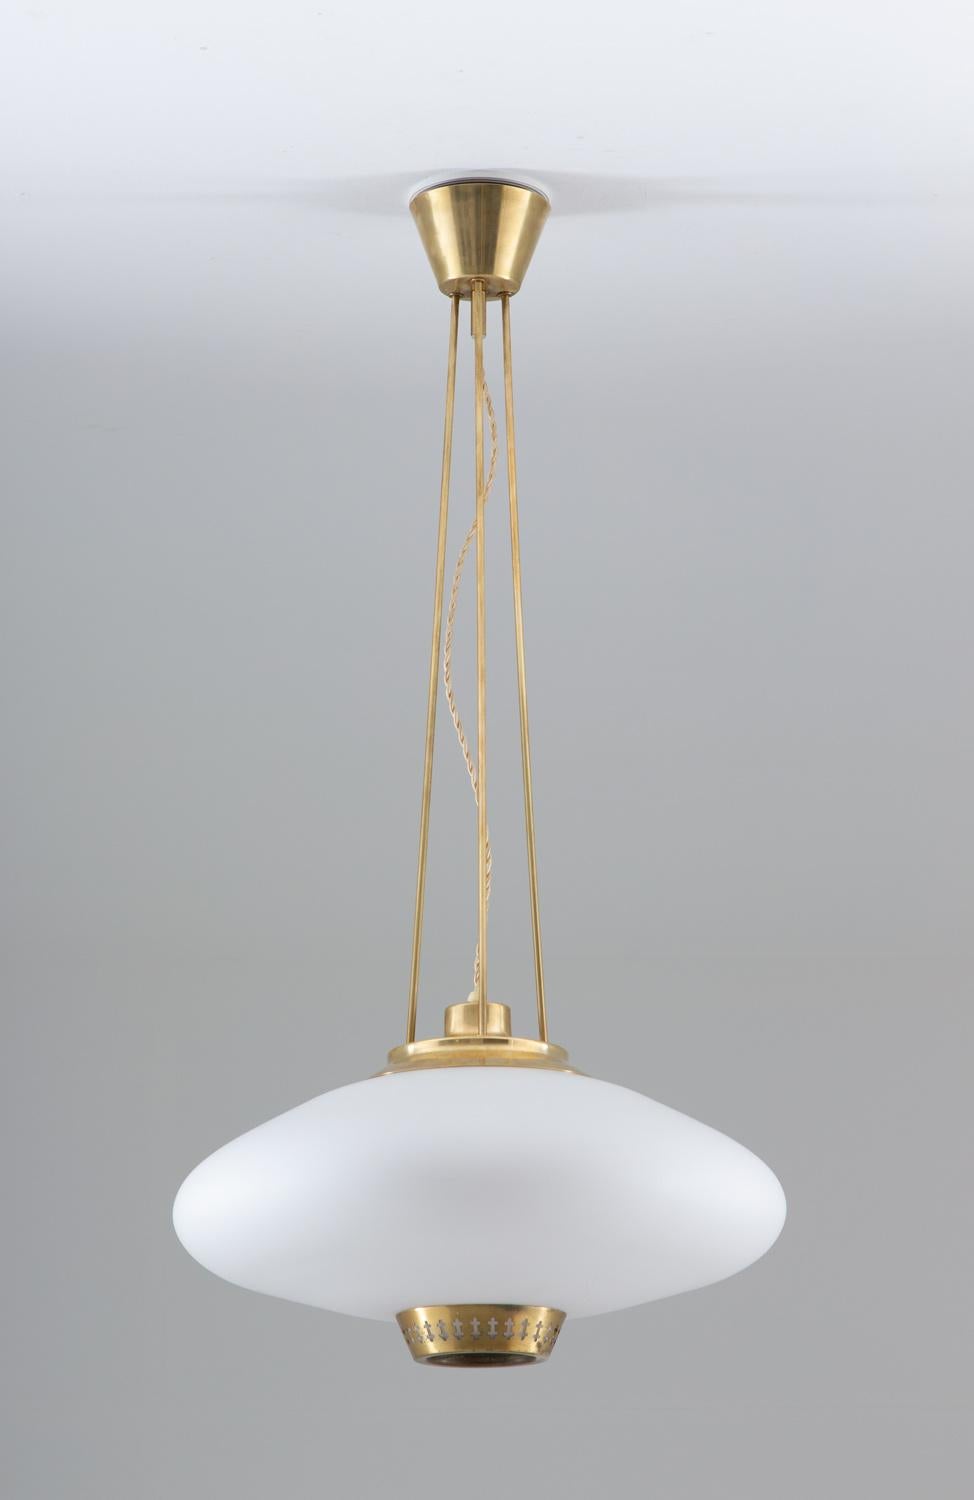 Midcentury pendant in brass and frosted opaline glass by Hans Bergström for ASEA, Sweden, 1950s.
This great looking pendant is made with the quality and details that Hans Bergström is famous for. The large opaline glass shade gives a soft, cozy